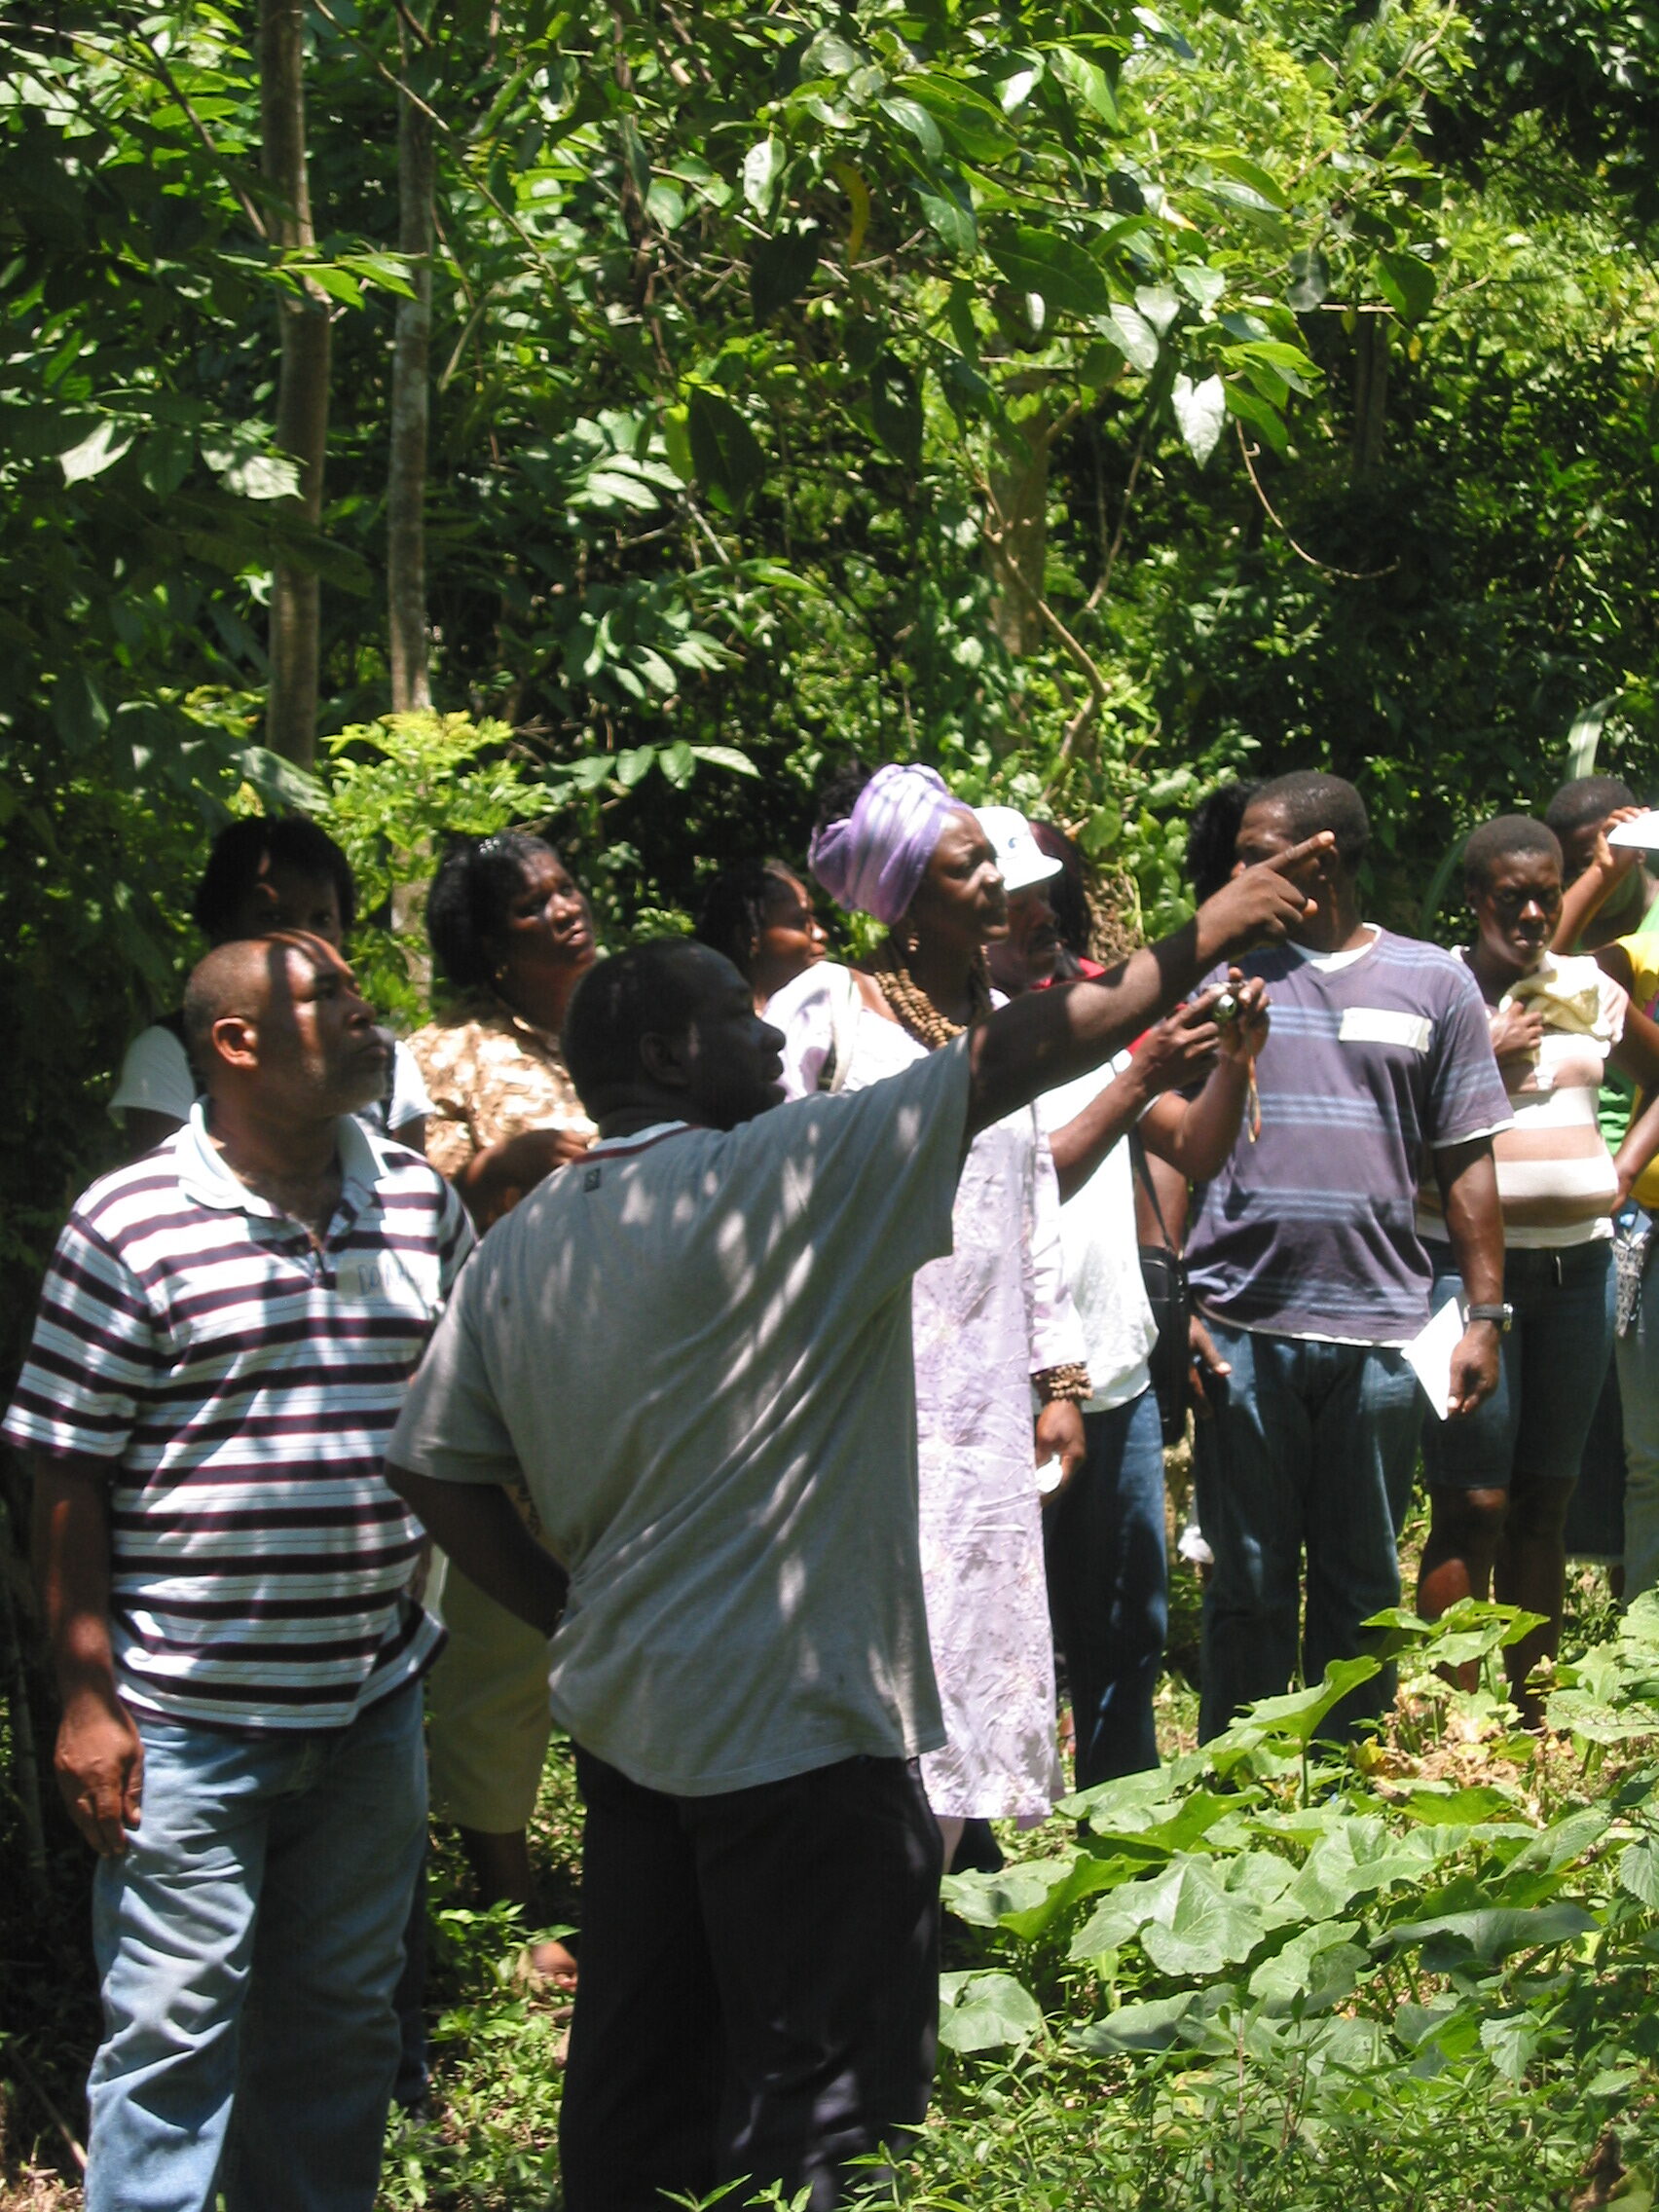 EU PARTNERS WITH REGIONAL STAKEHOLDERS TO IMPROVE FINANCIAL MANAGEMENT IN JAMAICA’S FORESTRY SECTOR.